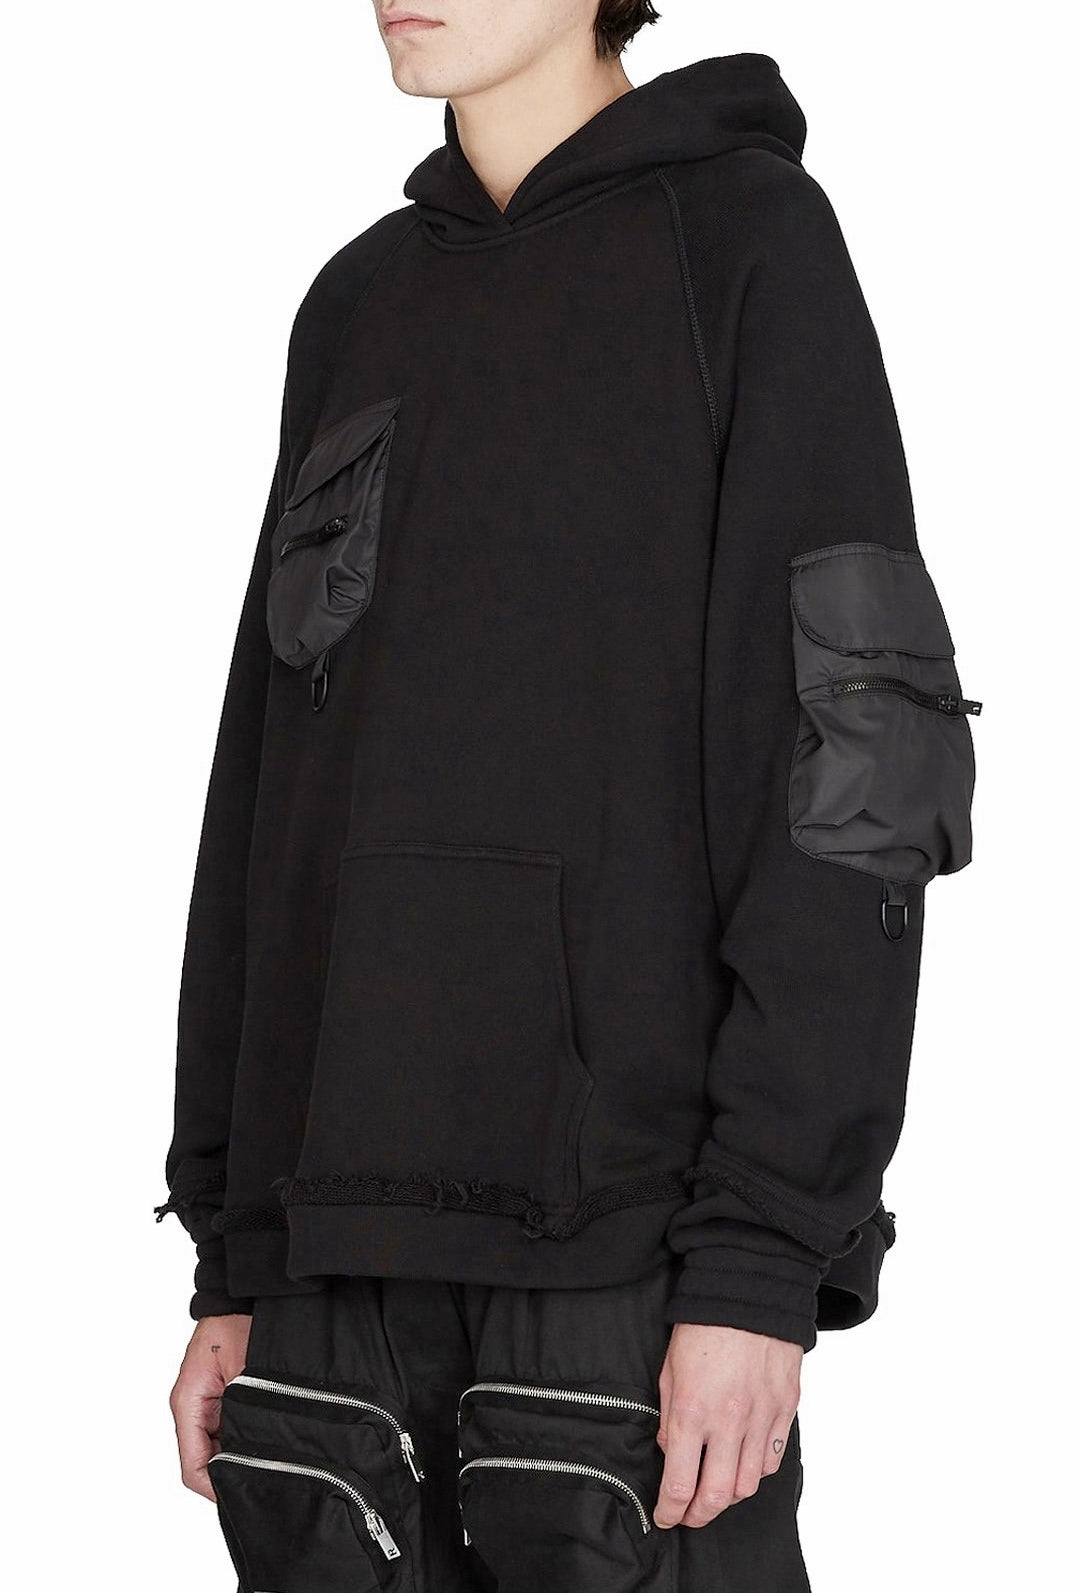 Men Techwear Military Oversized Hoodie with Tactical Sleeve and Chest Pocket